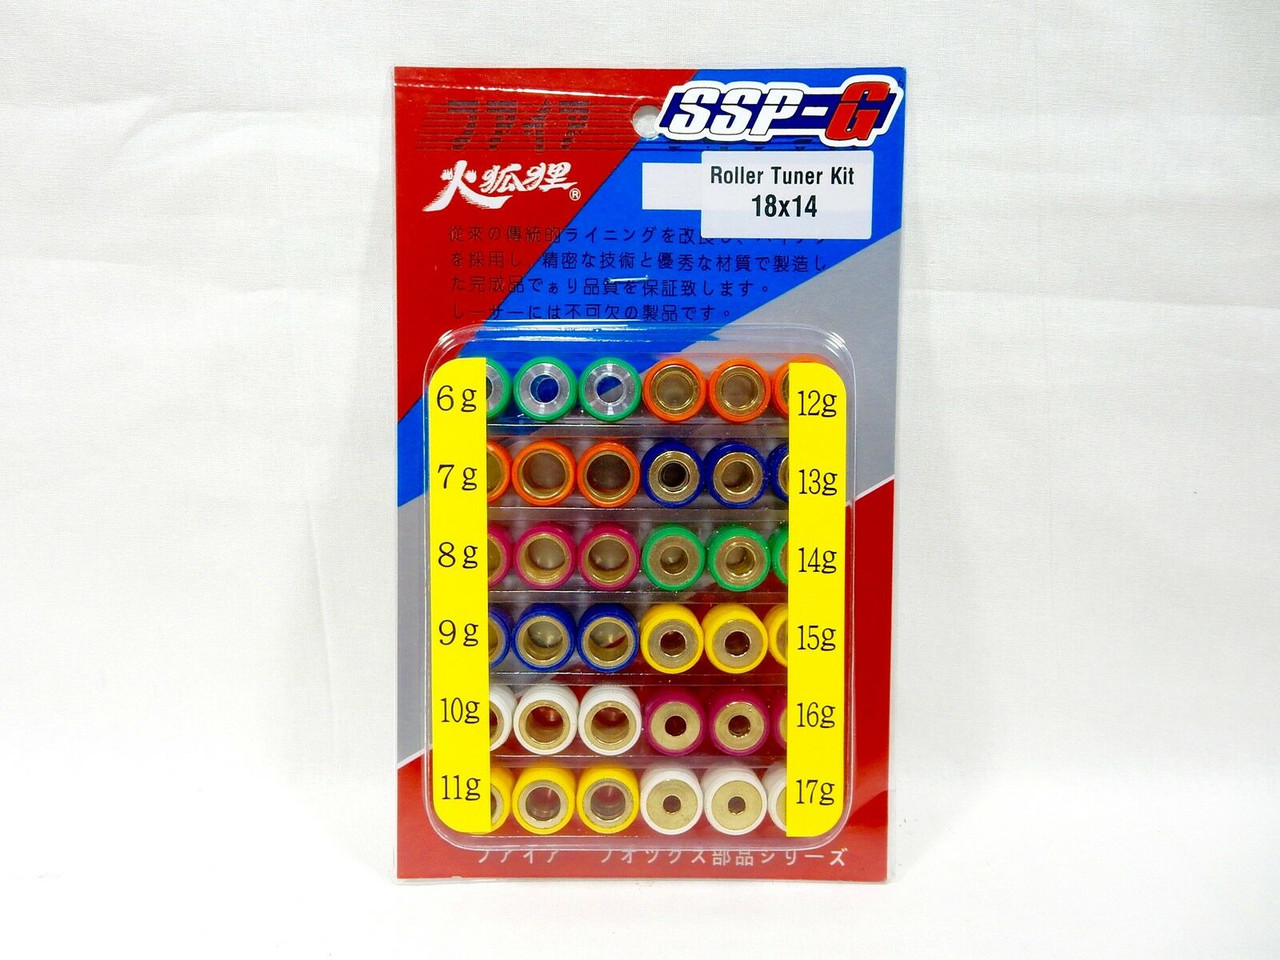 SSP-G ROLLER WEIGHT TUNING KIT (18x14) *6gm - 17gm* FOR 150cc - 232cc GY6 